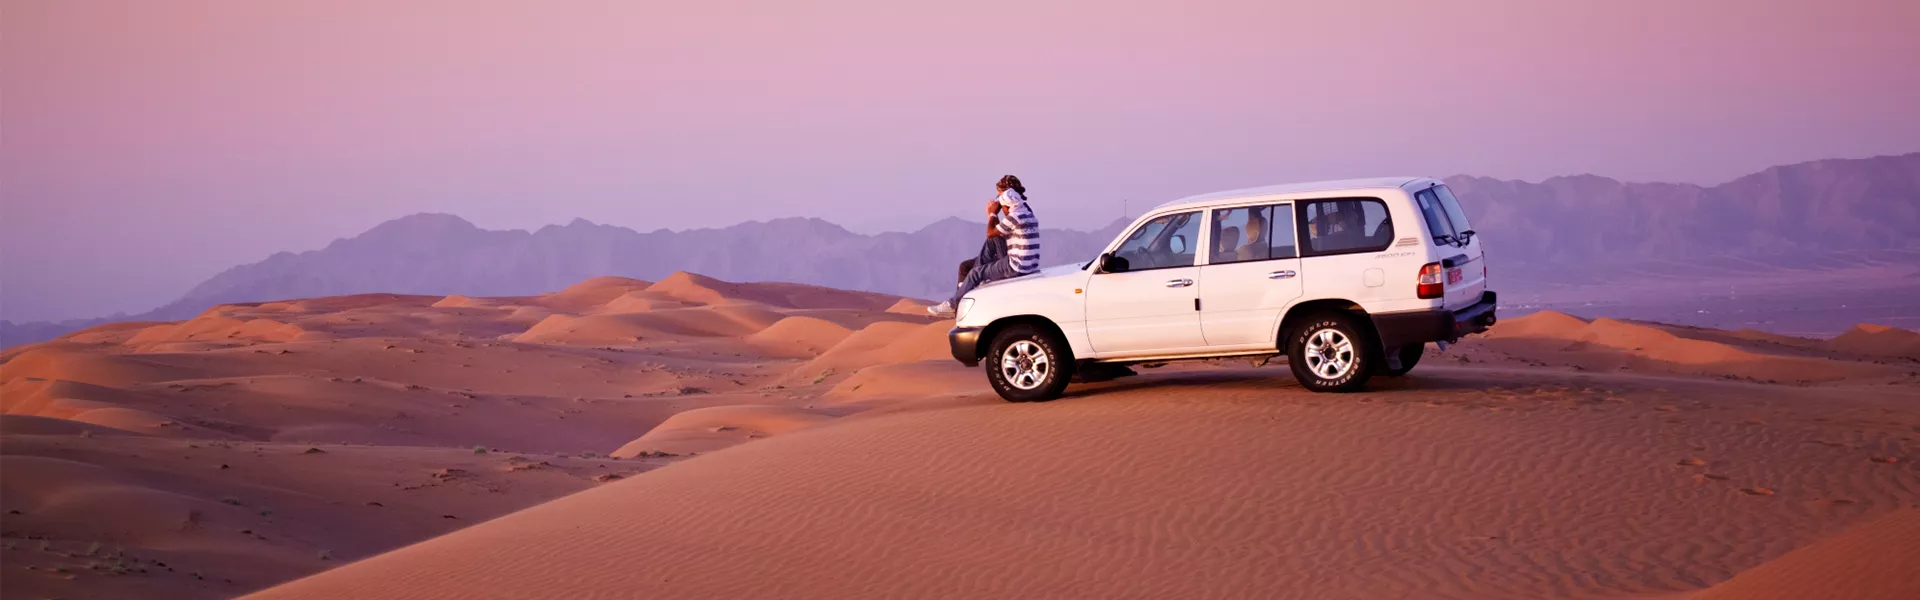 A white suv and people in the middle of a desert